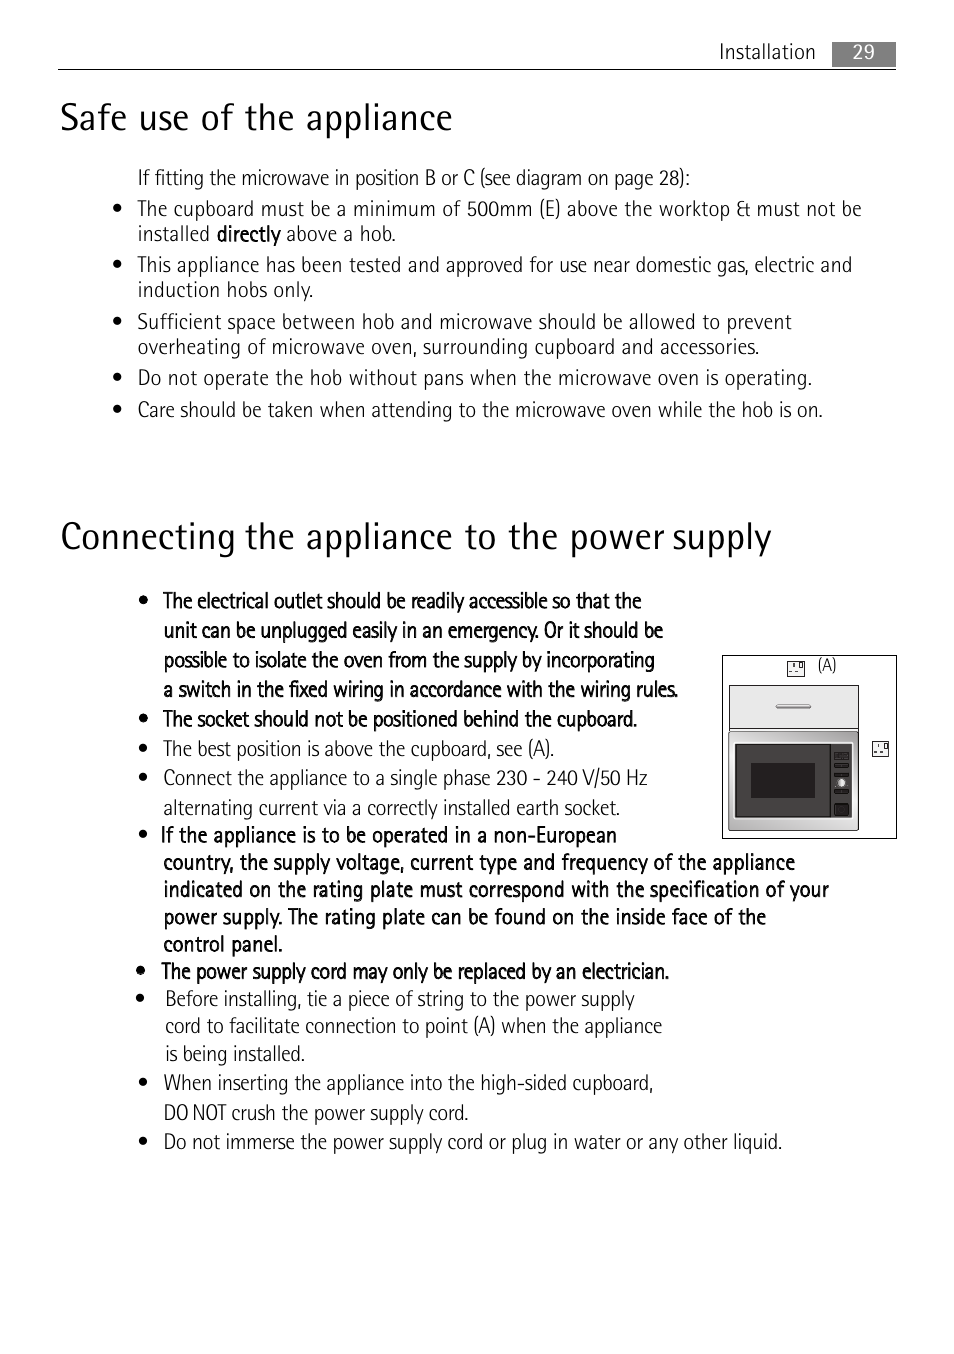 Safe use of the appliance, Connecting the appliance to the power supply | AEG MC2664E-W User Manual | Page 29 / 36